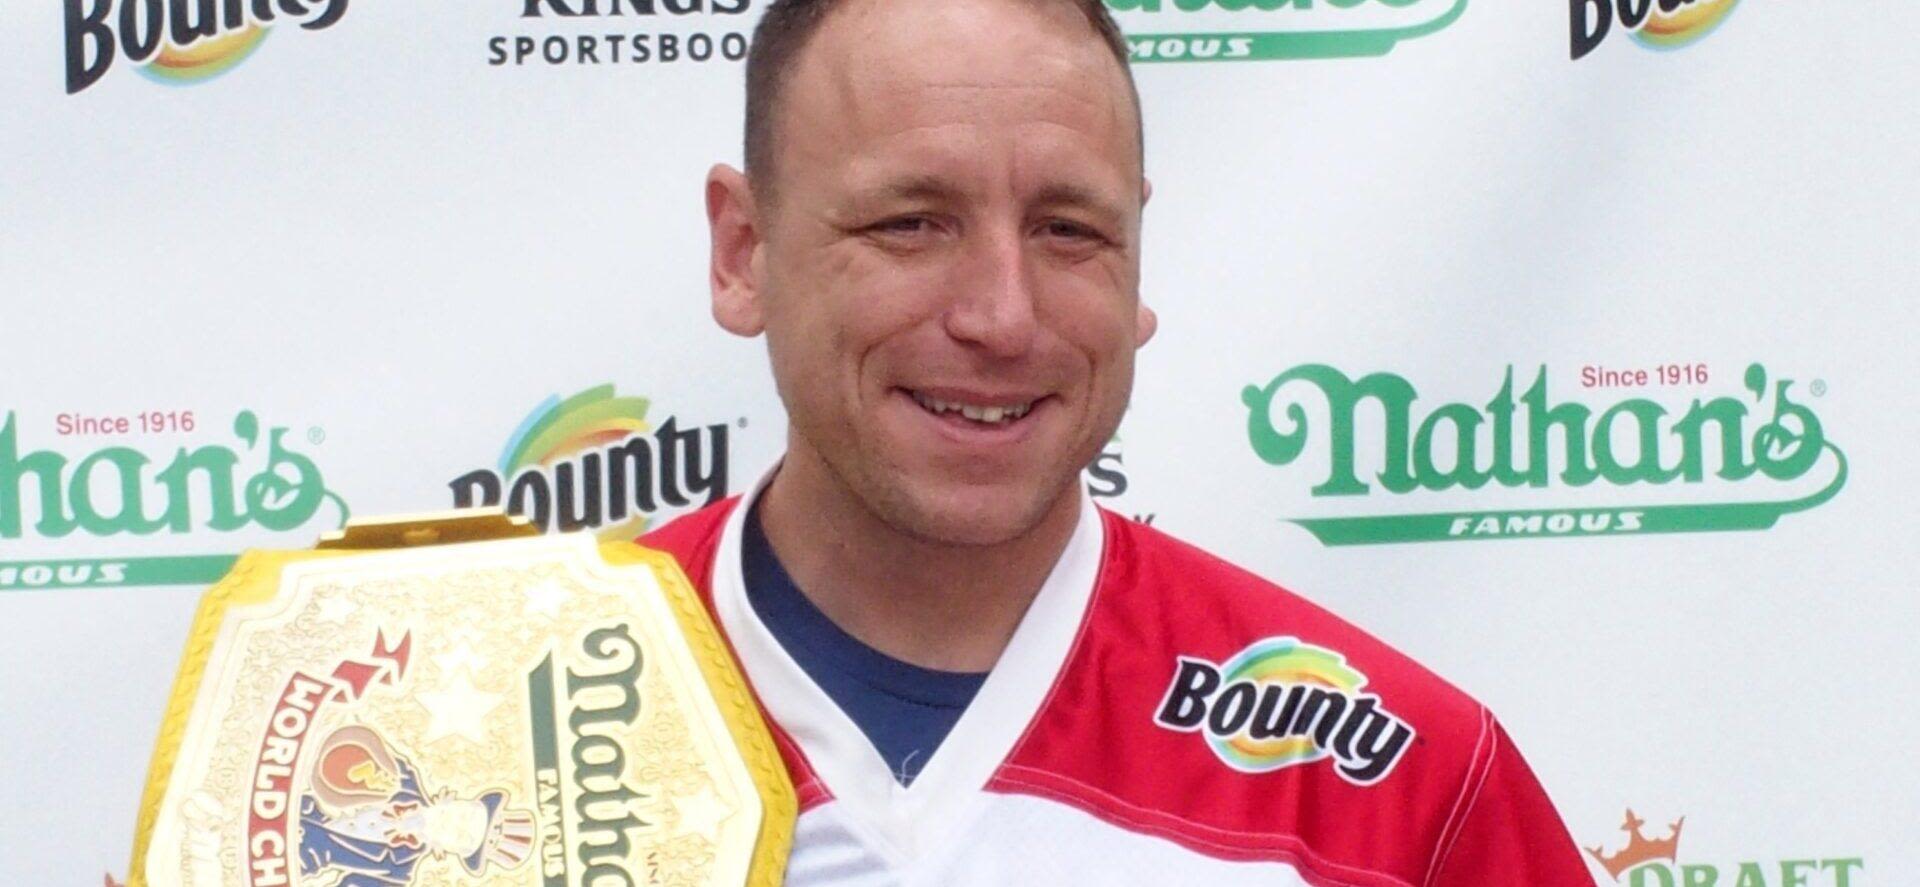 Joey Chestnut Will Compete In July 4th Competition Despite Nathan's Ban